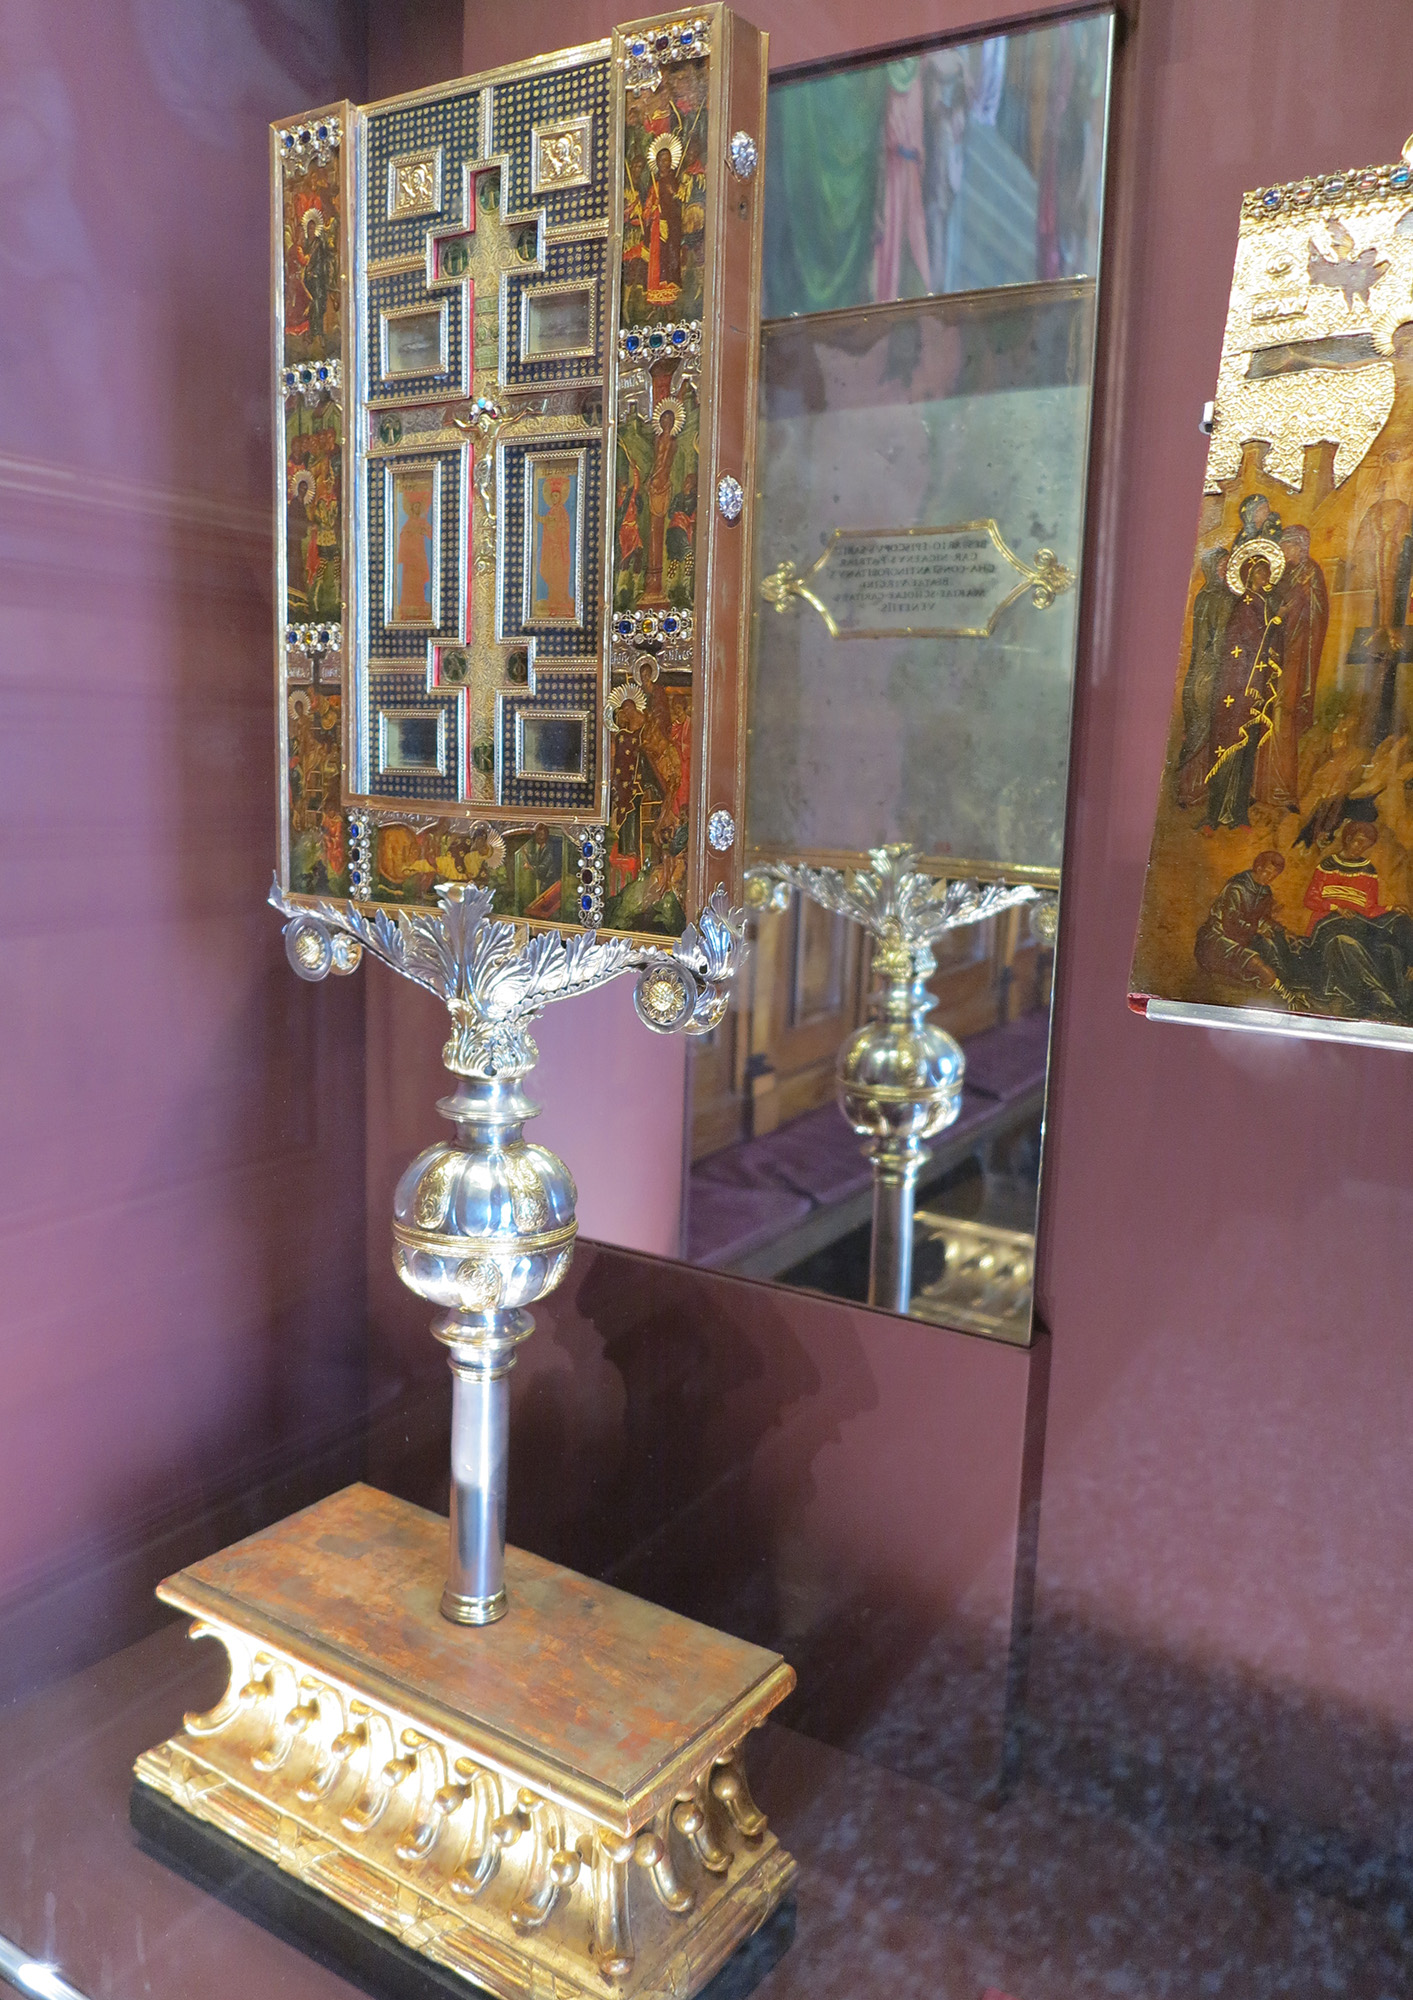 A painted reliquary with a metalwork cross, on a stand of metal on a wooden pedestal, open with its cover at the right, all before a mirror showing the reverse.